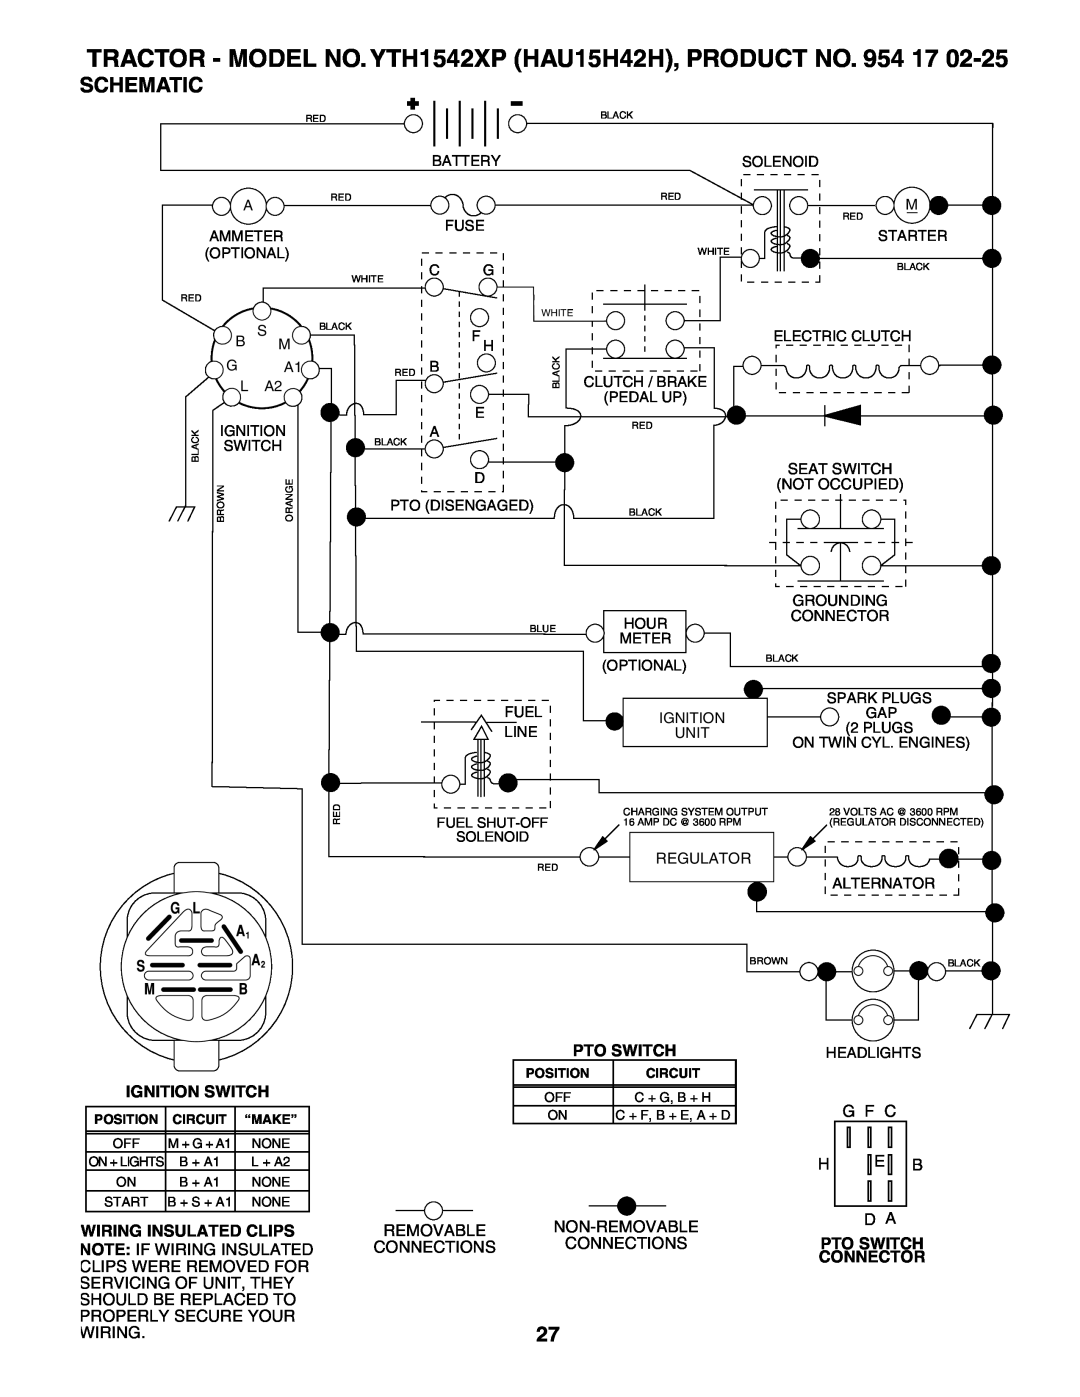 Husqvarna YTH1542XP owner manual Schematic, Ignition Switch, Wiring Insulated Clips, Pto Switch Connector 